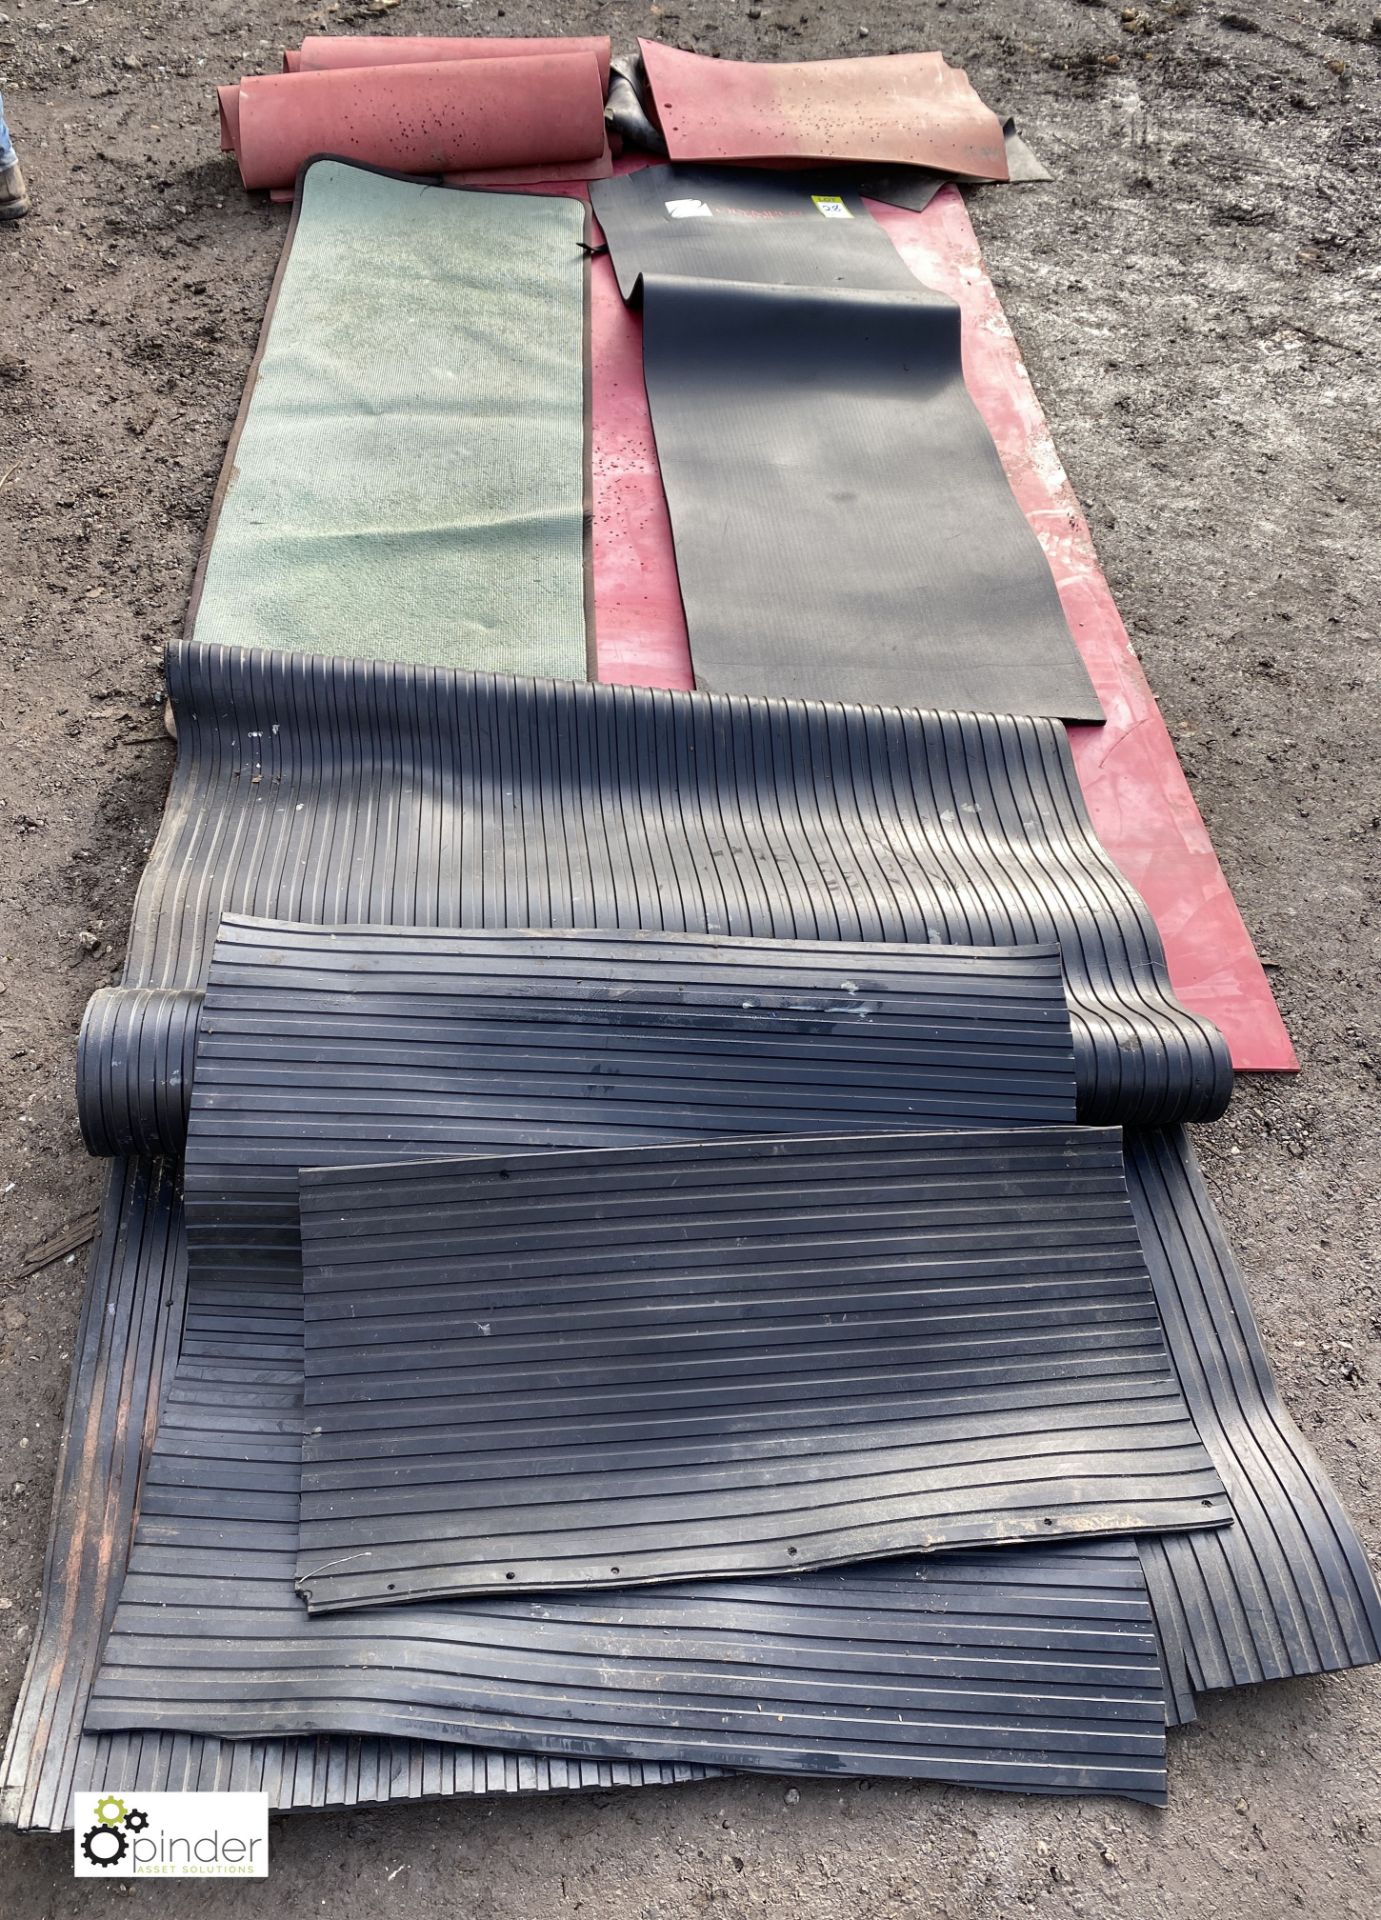 Approx 12 various rubber Training Mats, including Olympus